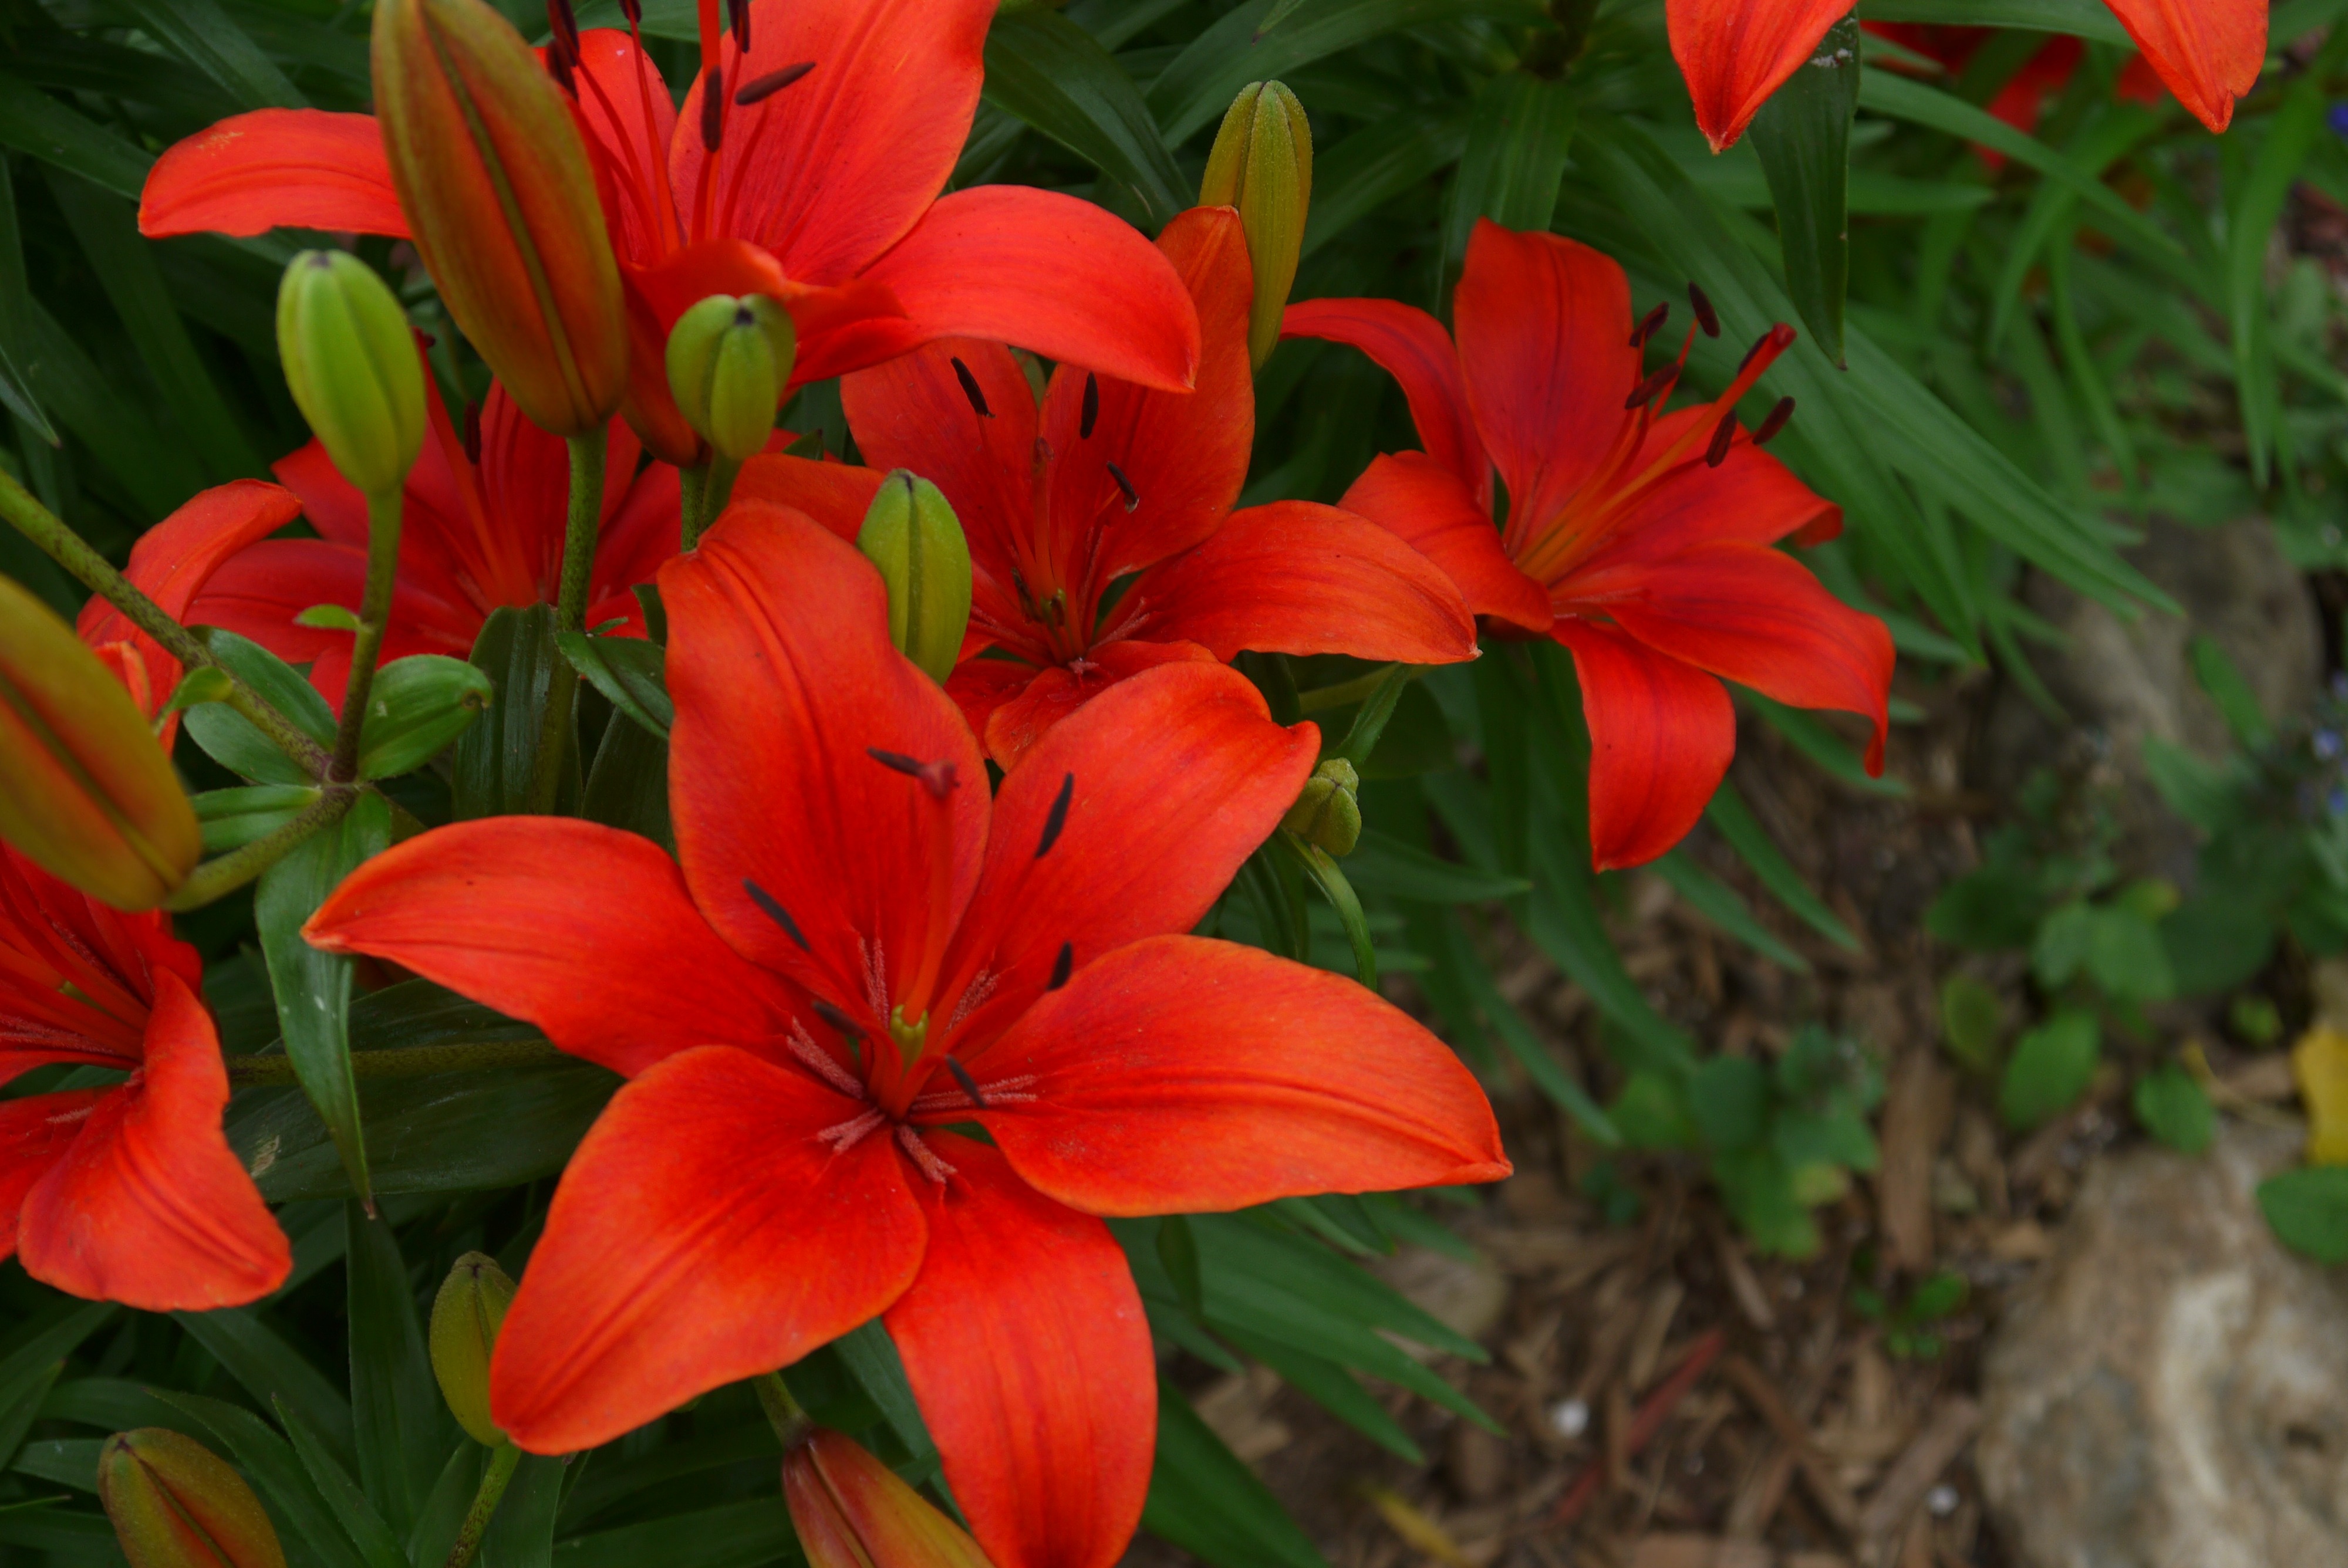 Earth Flower Lily Red Flower 4000x2672